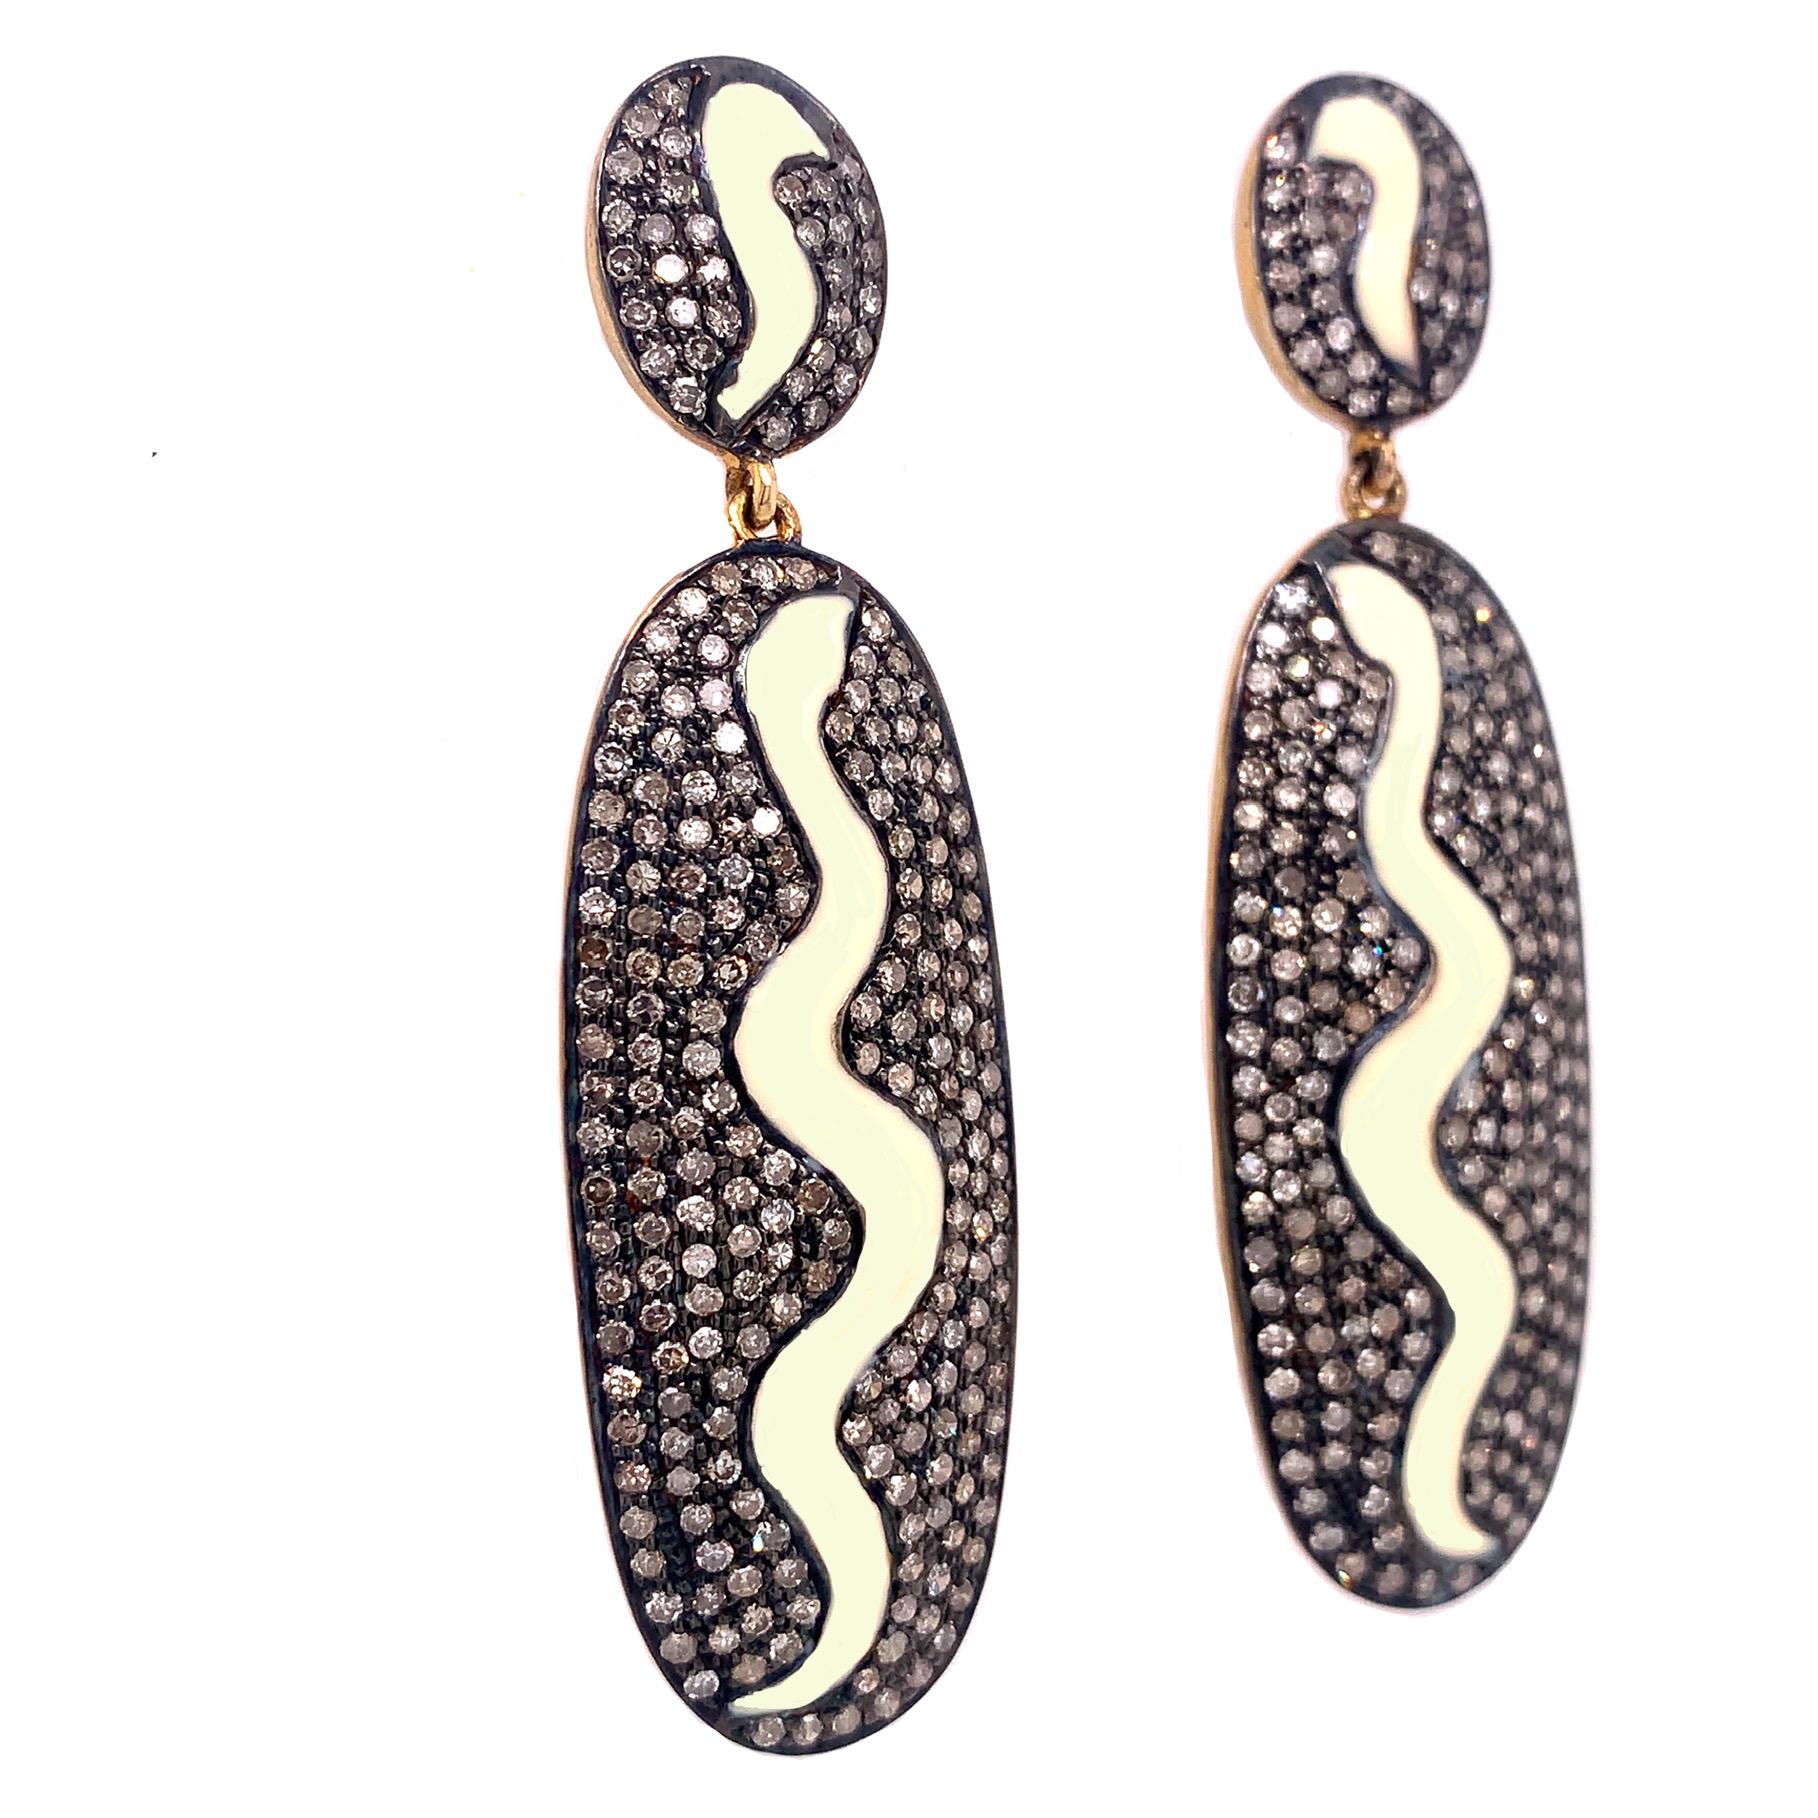 Rustic Collection

Elongated oval shape earrings with icy Diamonds and white Enamel set in Sterling Silver and gold plating.

Diamond: 3.00ct total weight.
